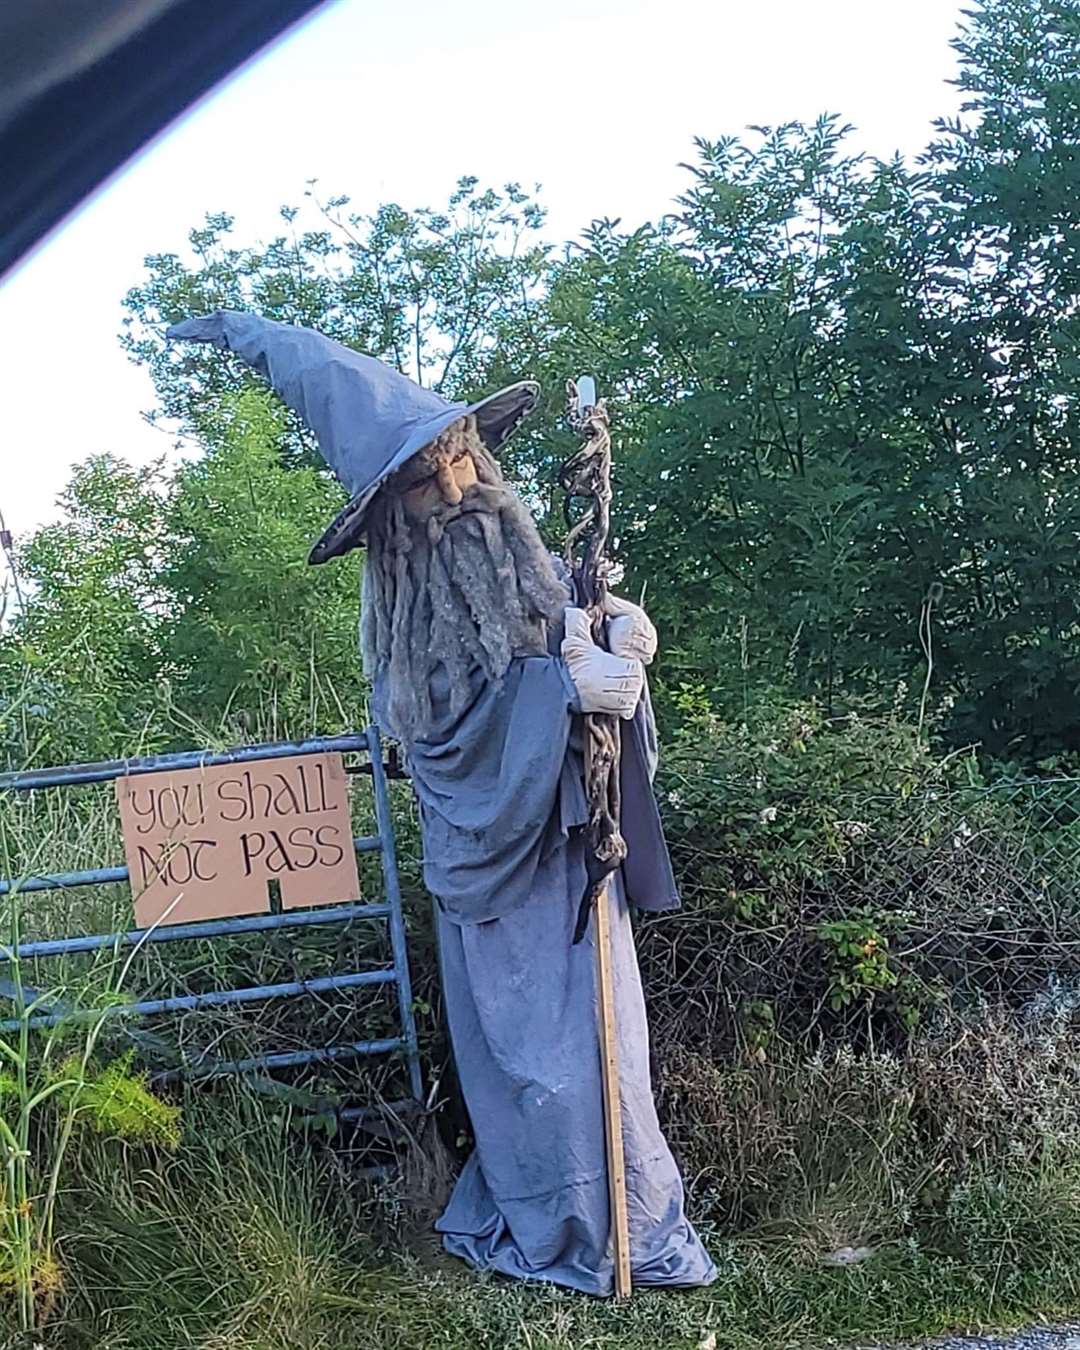 A scarecrow of Gandalf from the Lord Of The Rings next to a gate (Louise Henson/PA)